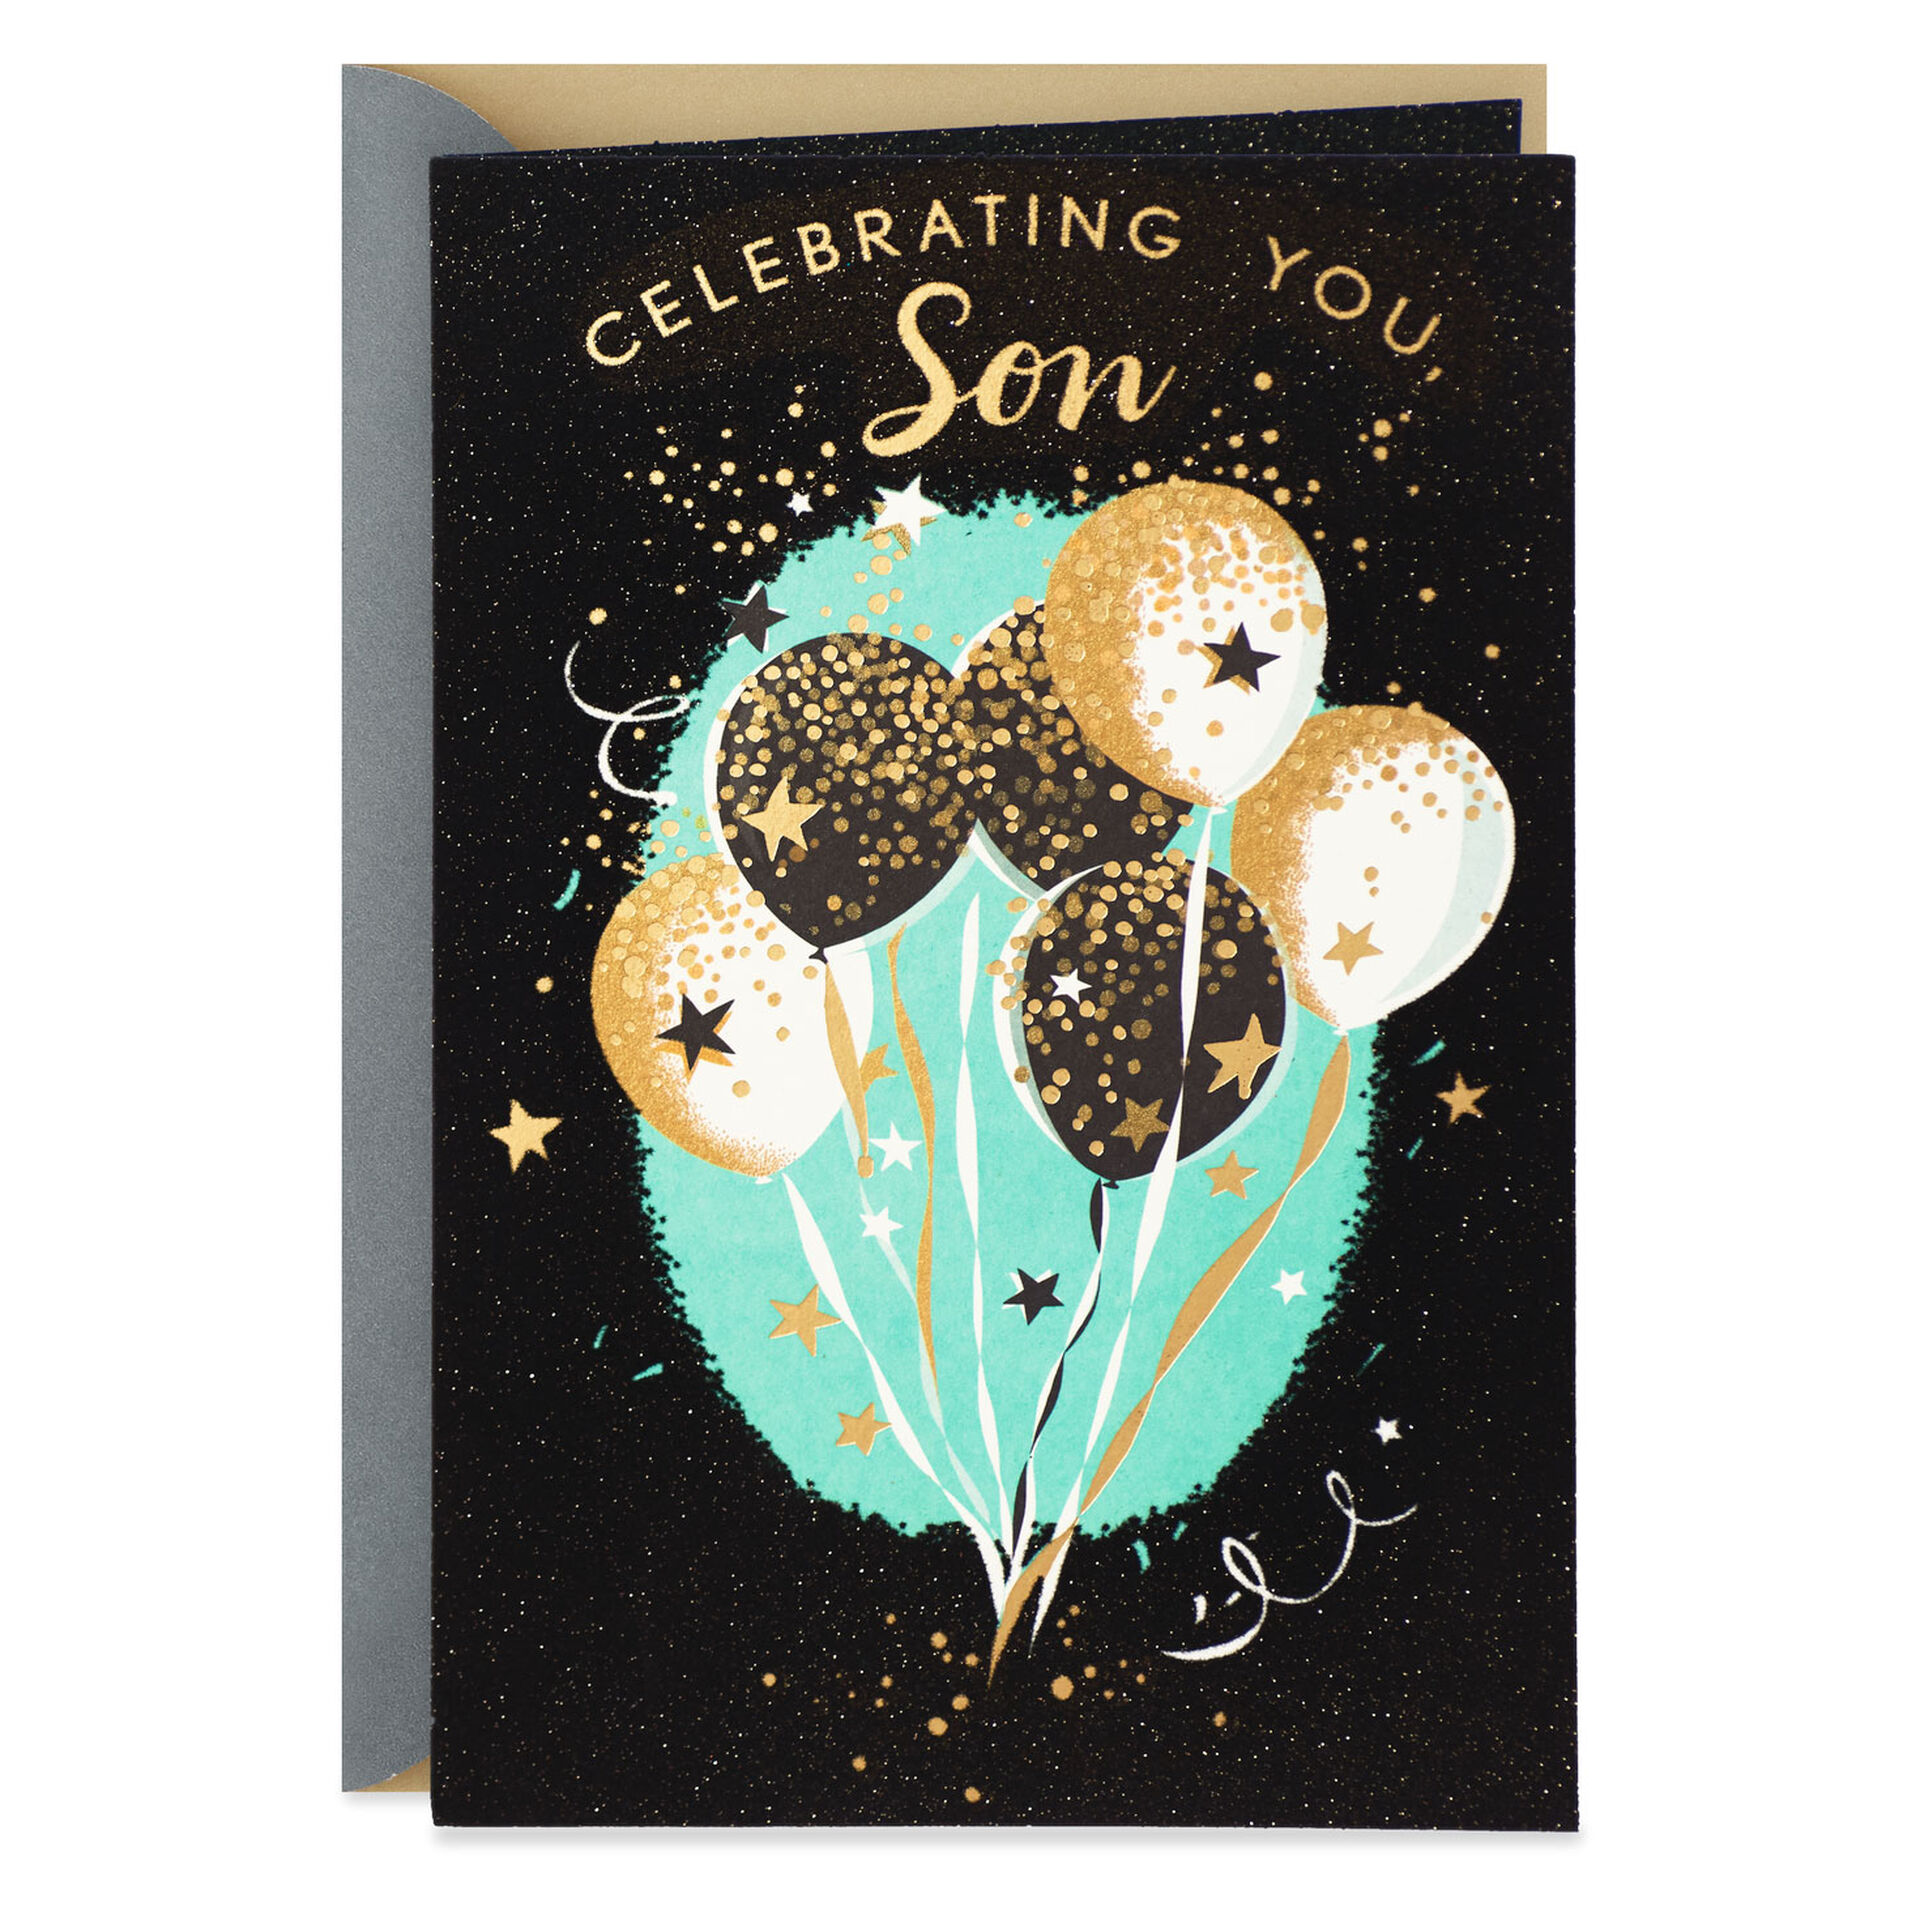 Starry-Balloons-Birthday-Card-for-Son_659MAN3387_01 (1)